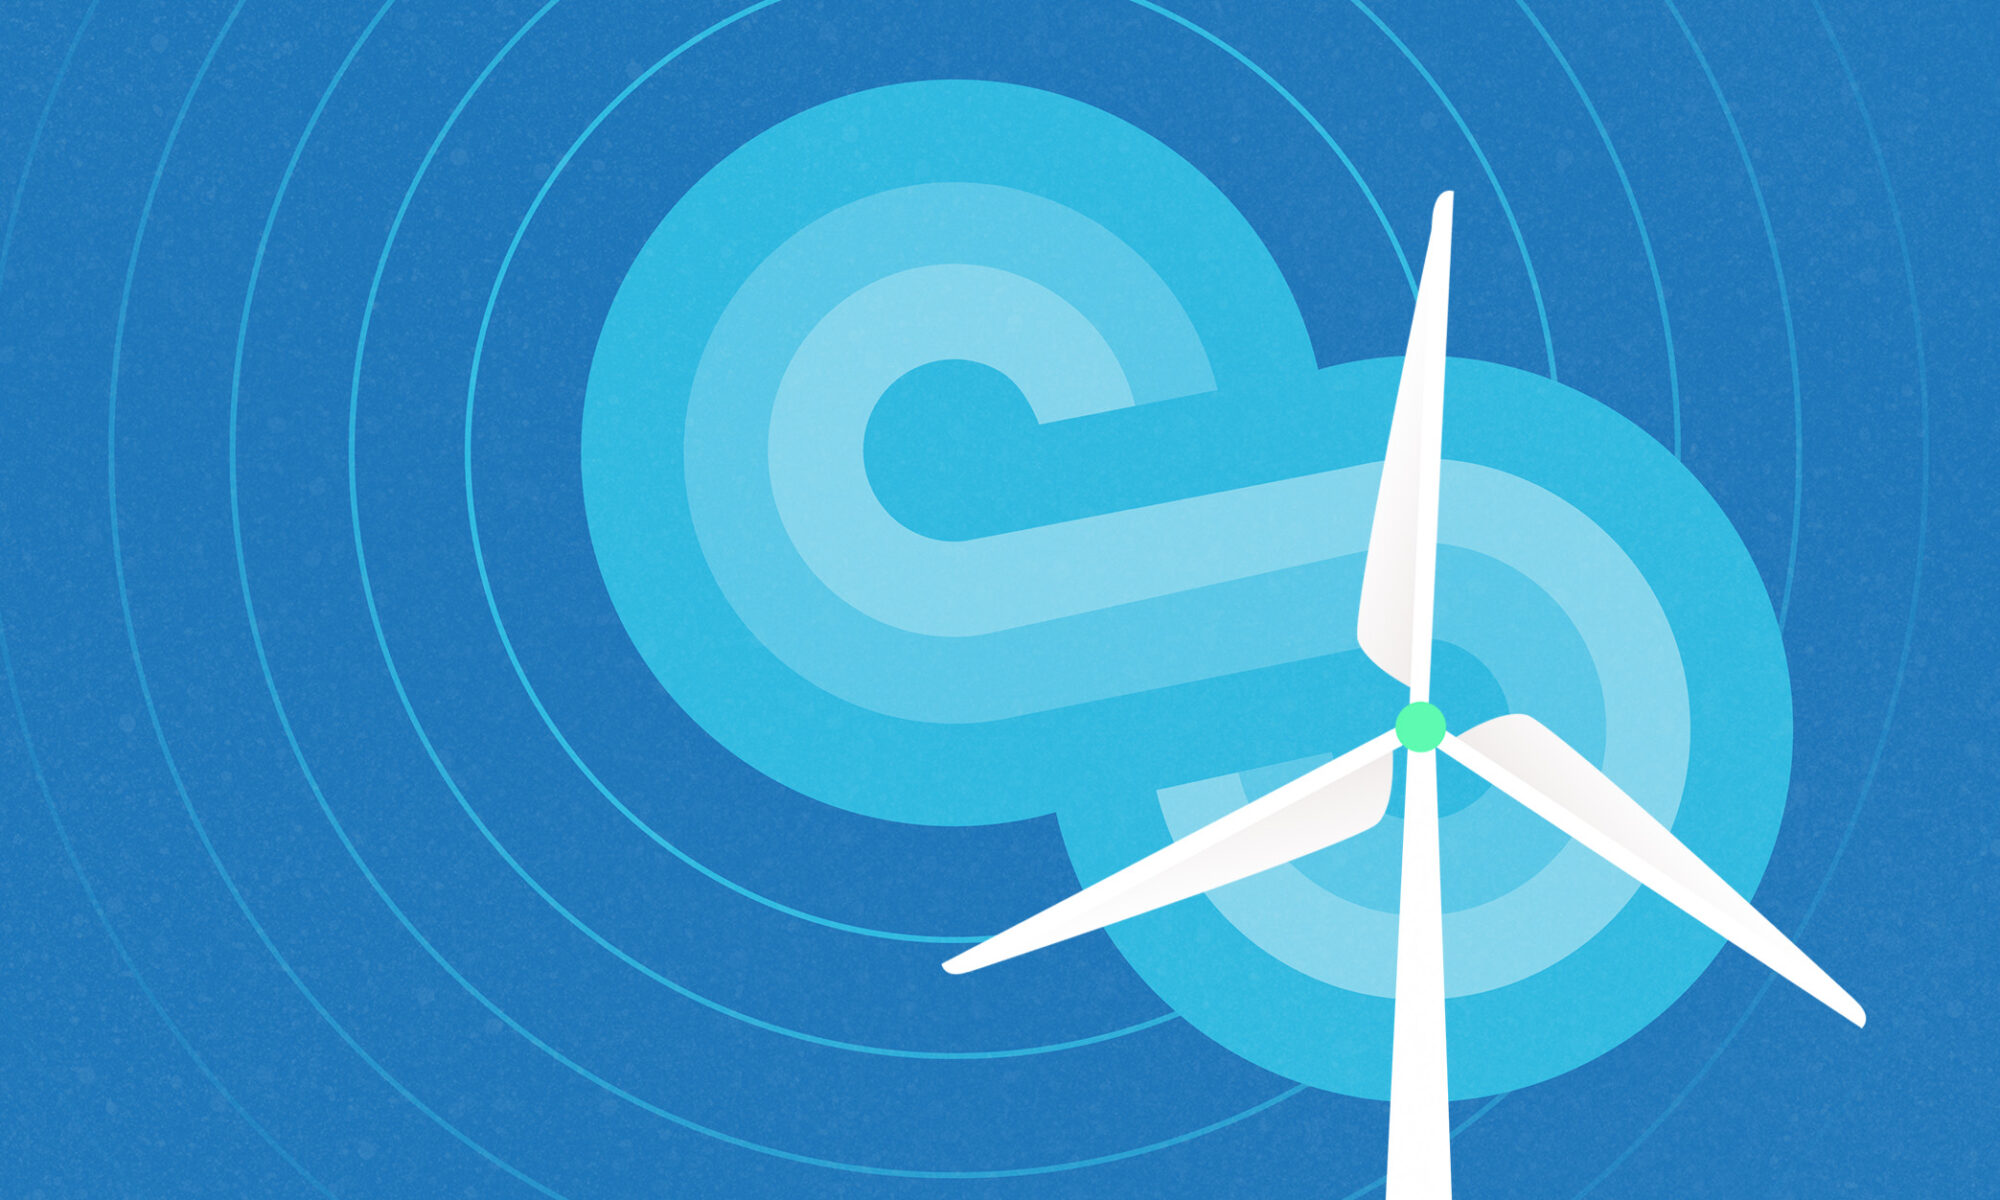 Illustration of an offshore windmill with the blades against an infinity sign